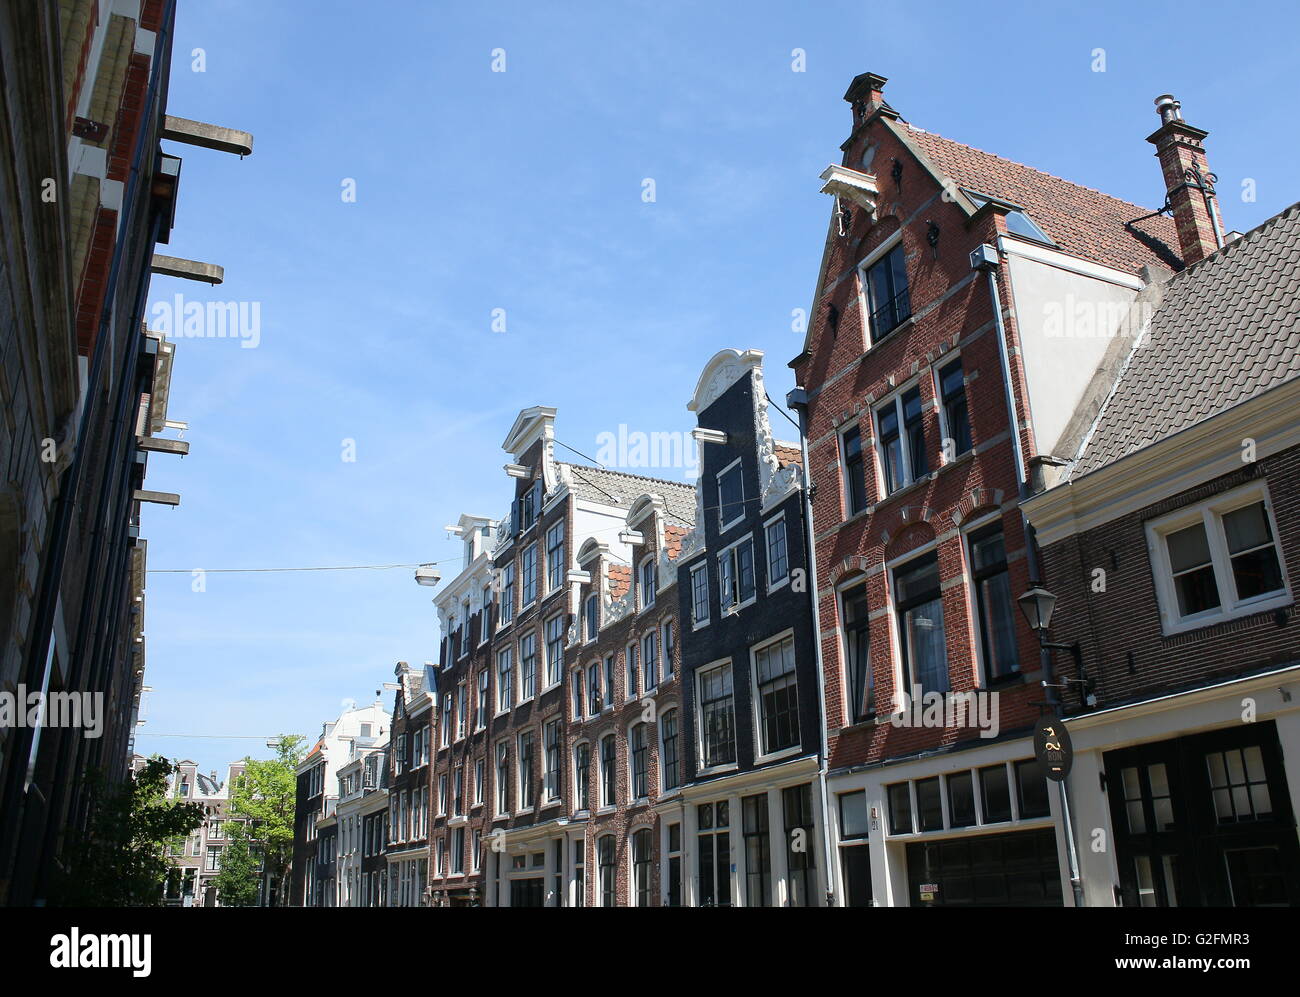 Different styles of old 17th & 18th century gables along Kerkstraat, just off Leidseplein square, central Amsterdam, Netherlands Stock Photo